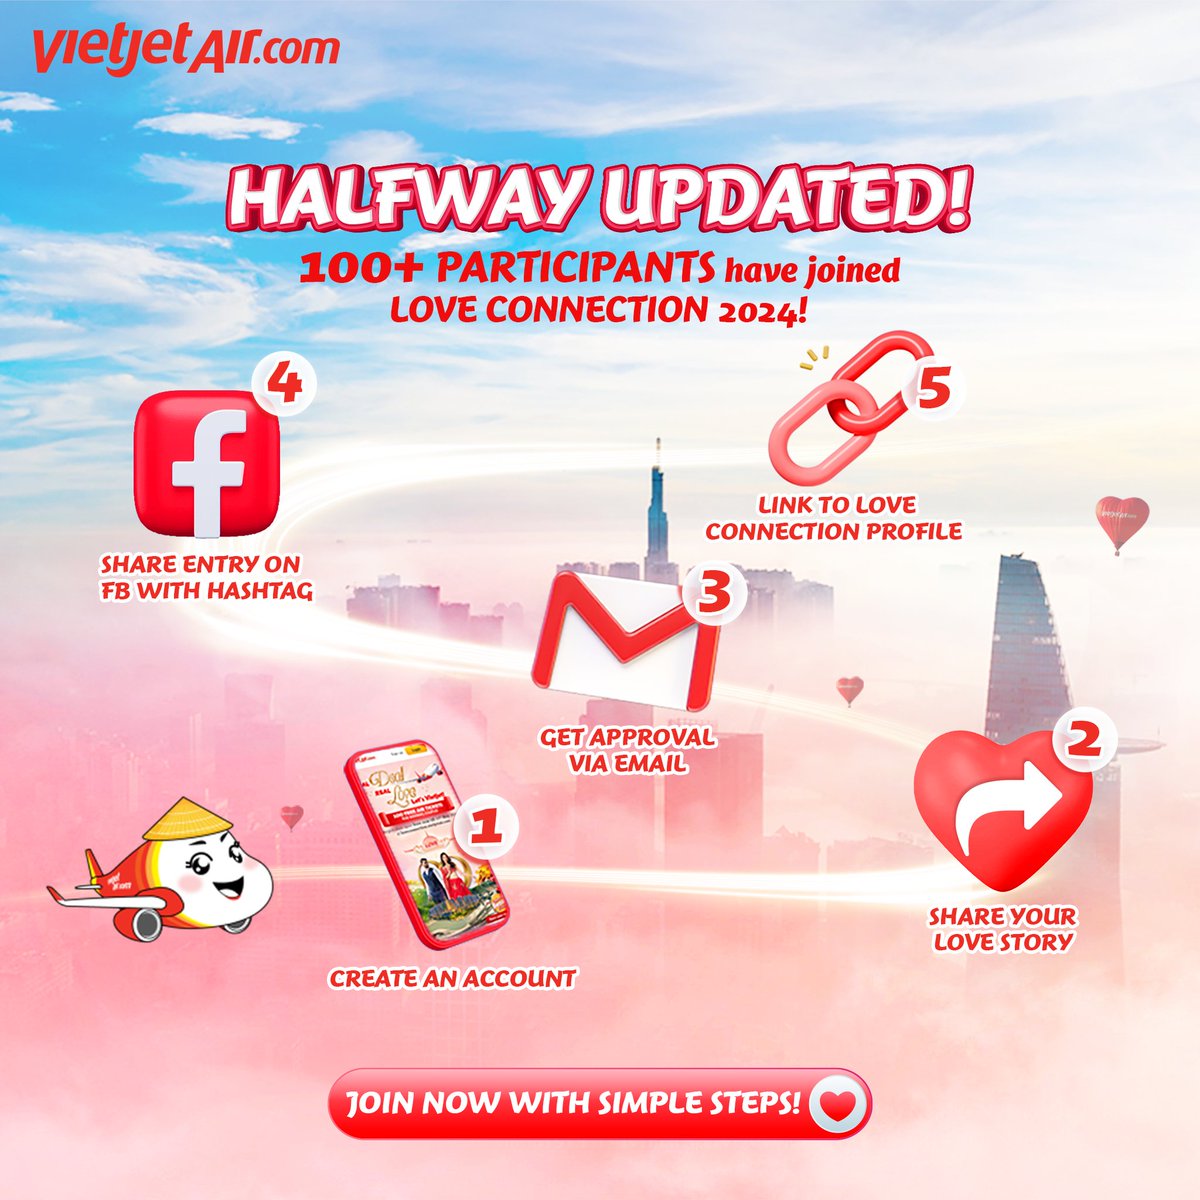 HALFWAY UPDATED! 100+ participants have joined Love Connection 2024! 📣Don't miss the chance to explore Vietnam with FREE flight tickets* for 25 lucky pairs 👉Visit loveconnection.vietjetair.com & follow these 5 simple steps to enter! ⏰Contest ends 31/05/2024 (*)T&C Apply #Vietjet